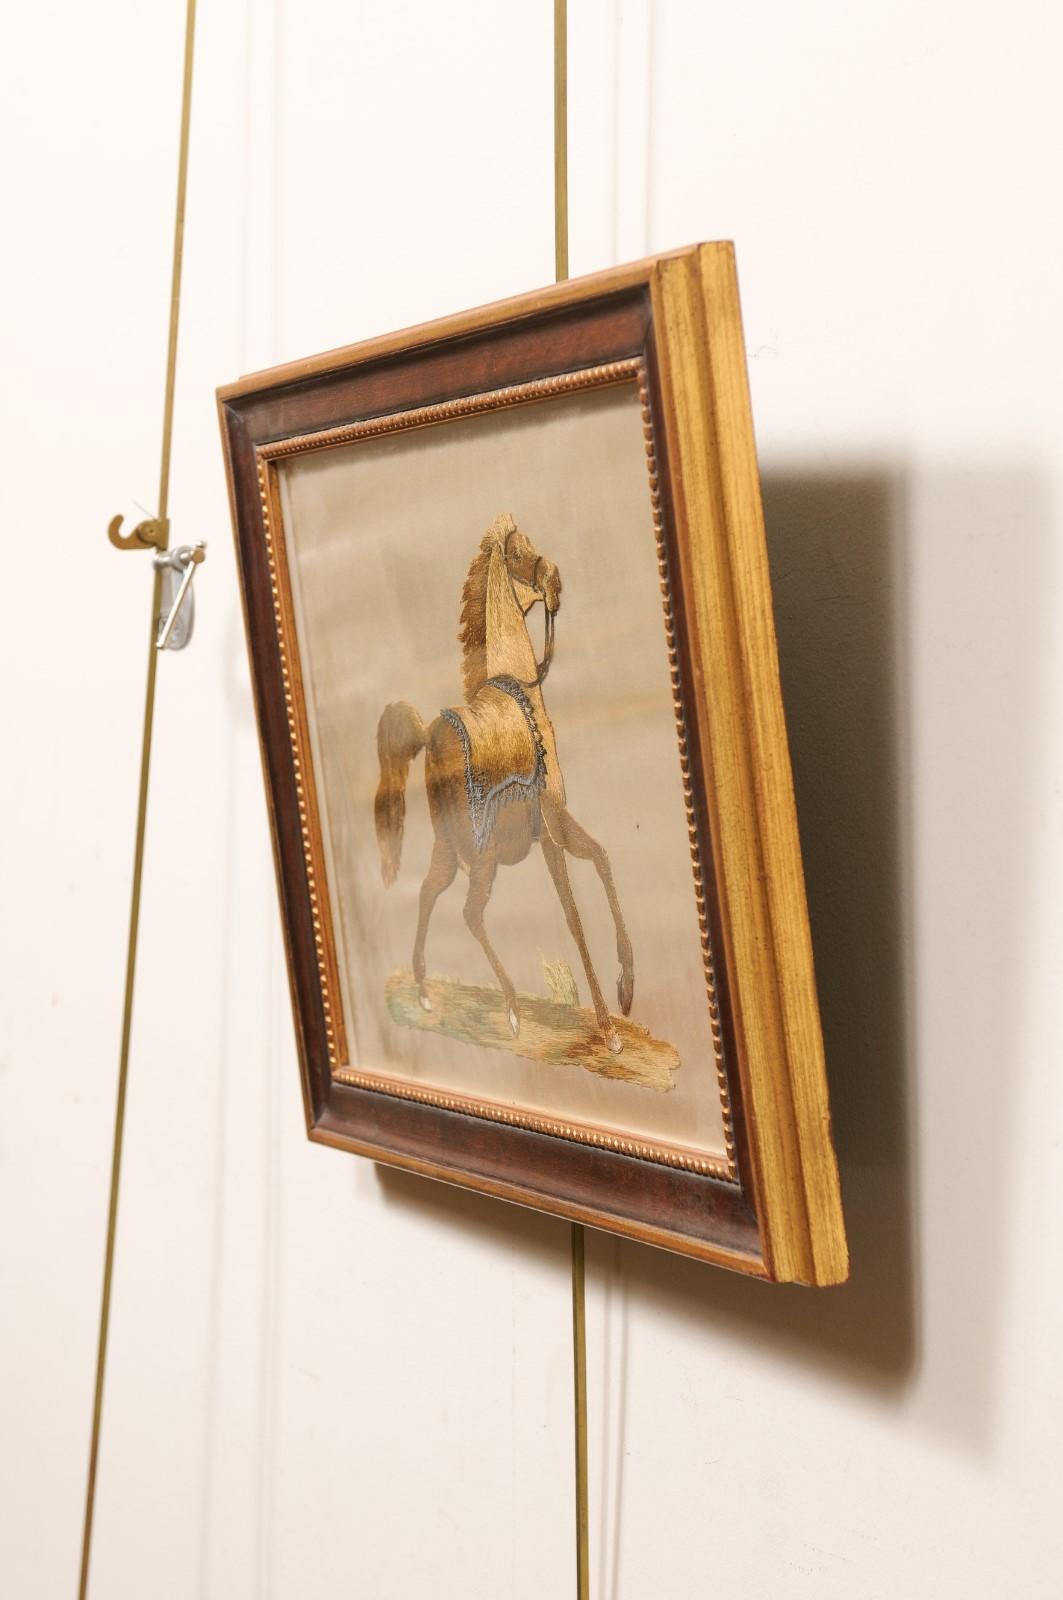 Framed 19th Century Silk Embroidery of Horse In Good Condition For Sale In Atlanta, GA